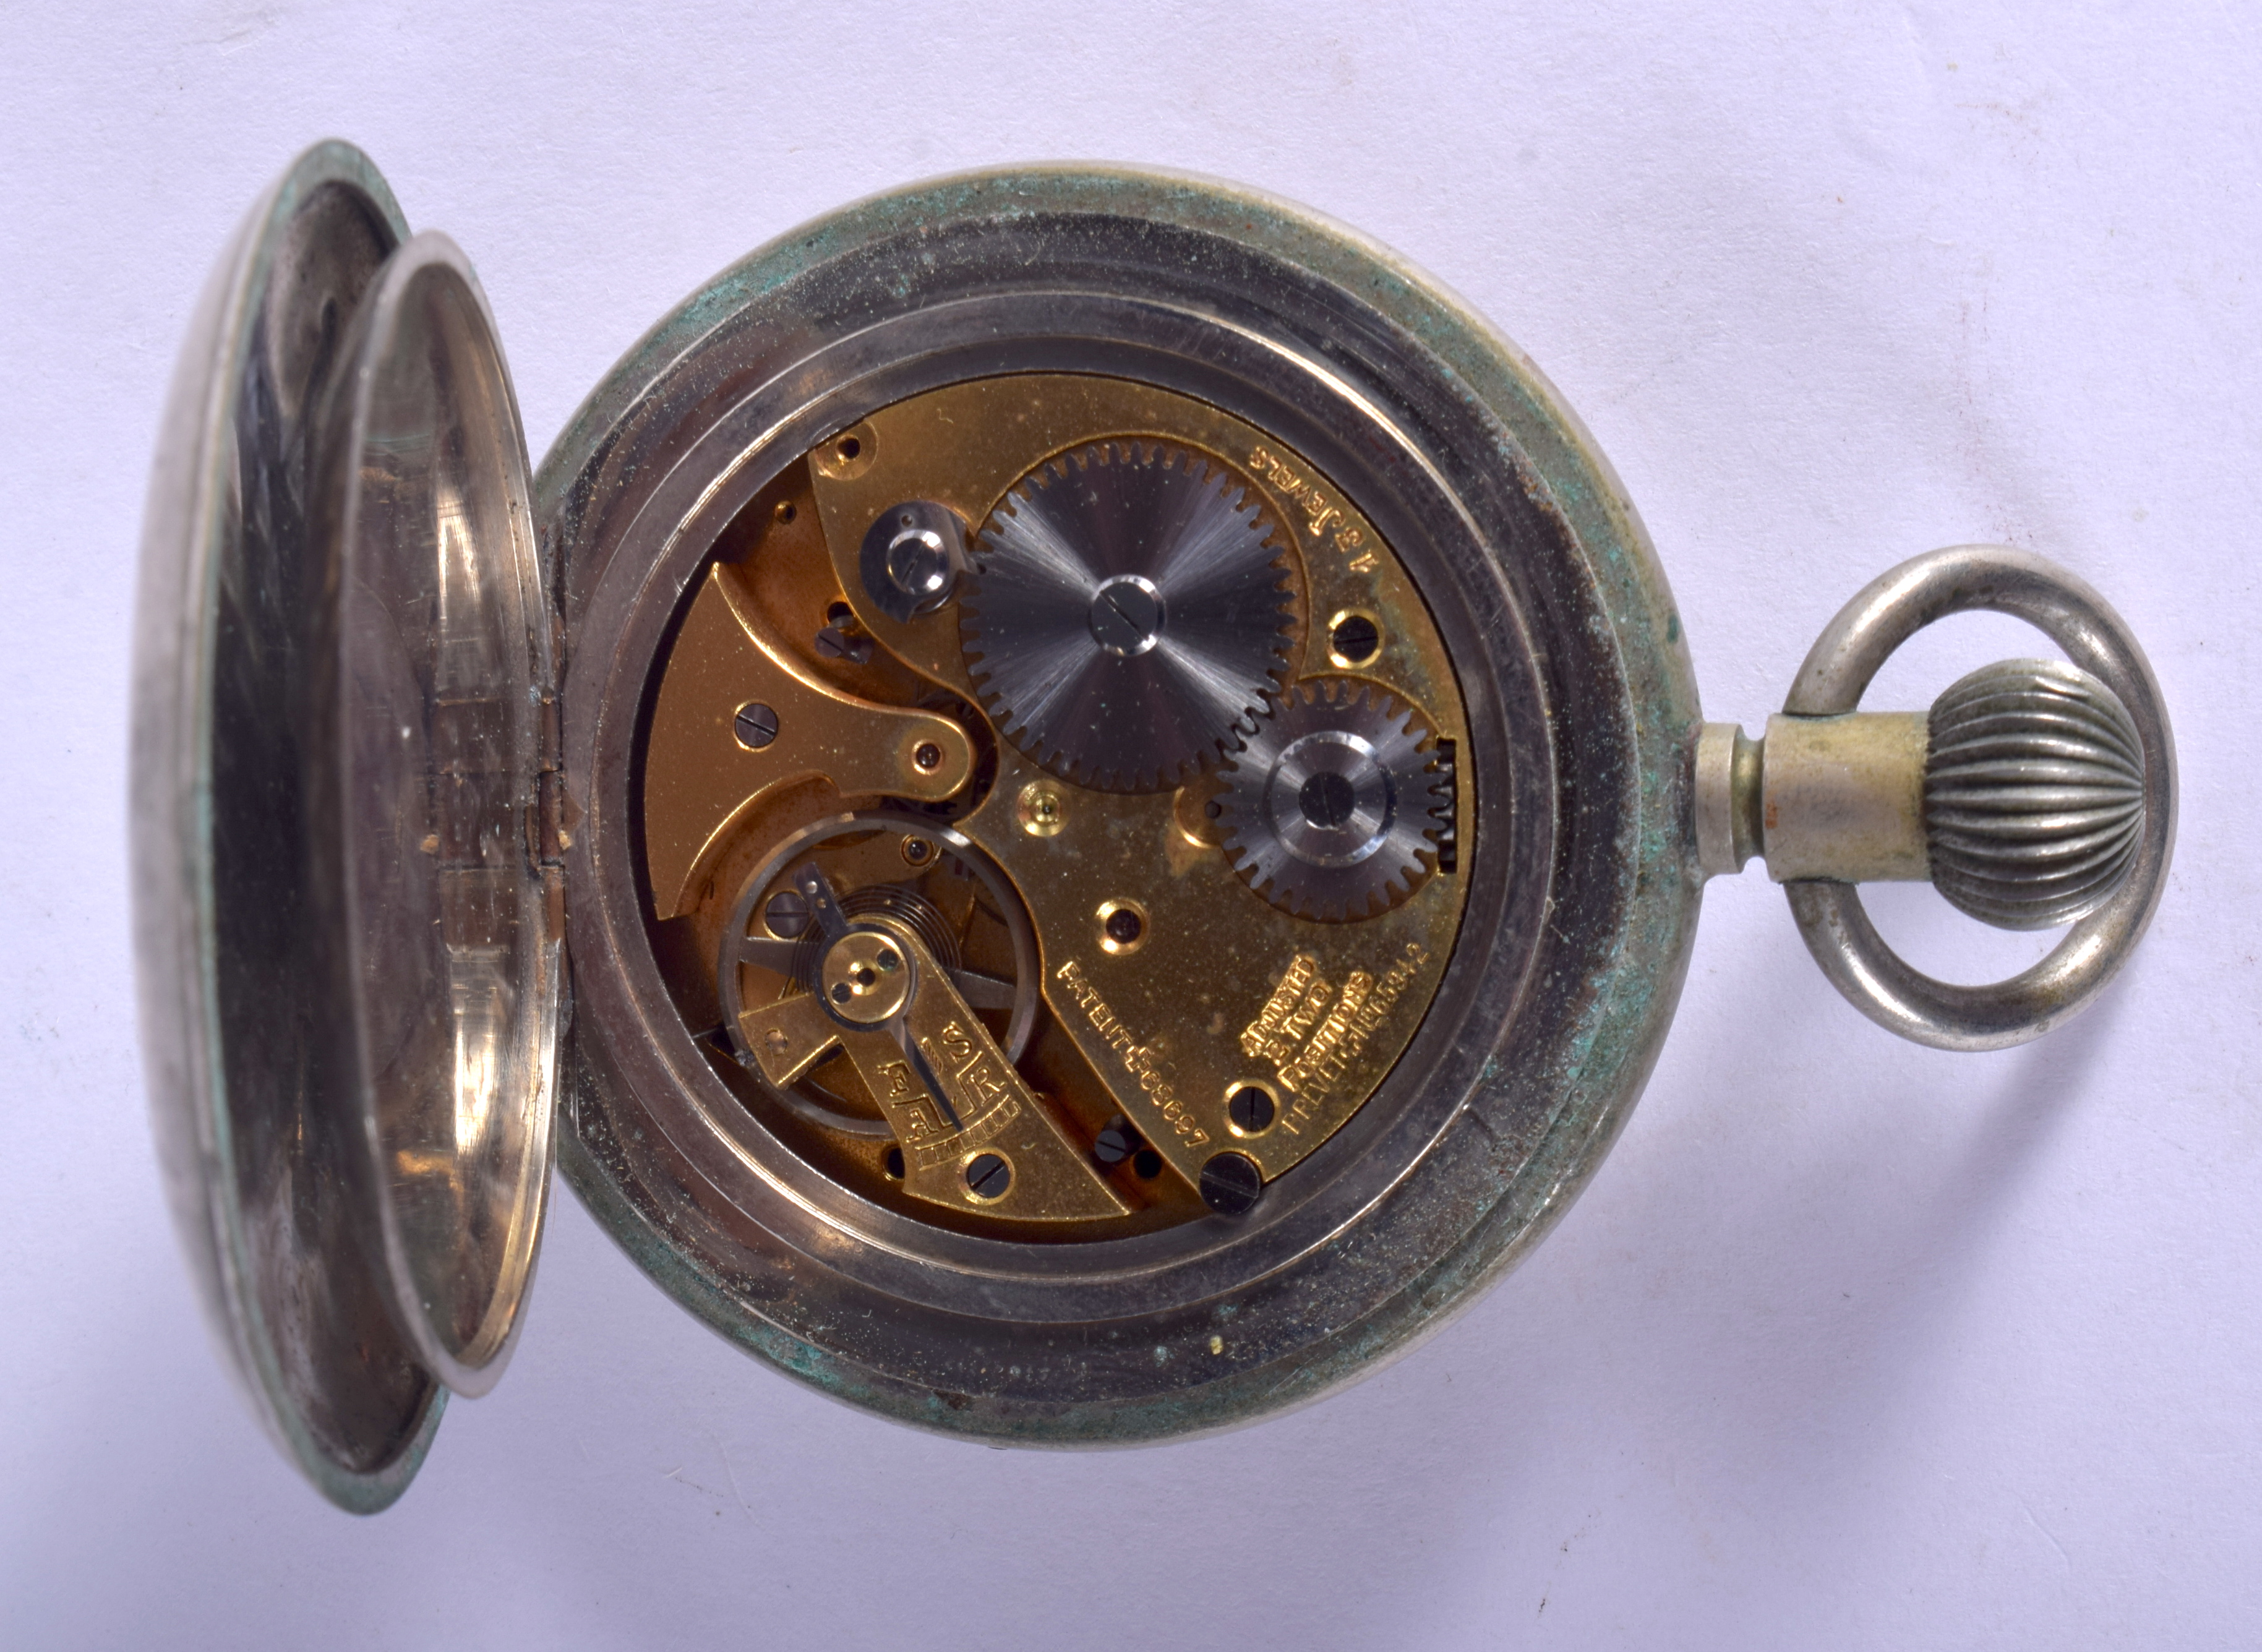 A VINTAGE SORLEY OF GLASGLOW SECONDS POCKET WATCH. 5.5 cm diameter. - Image 3 of 3